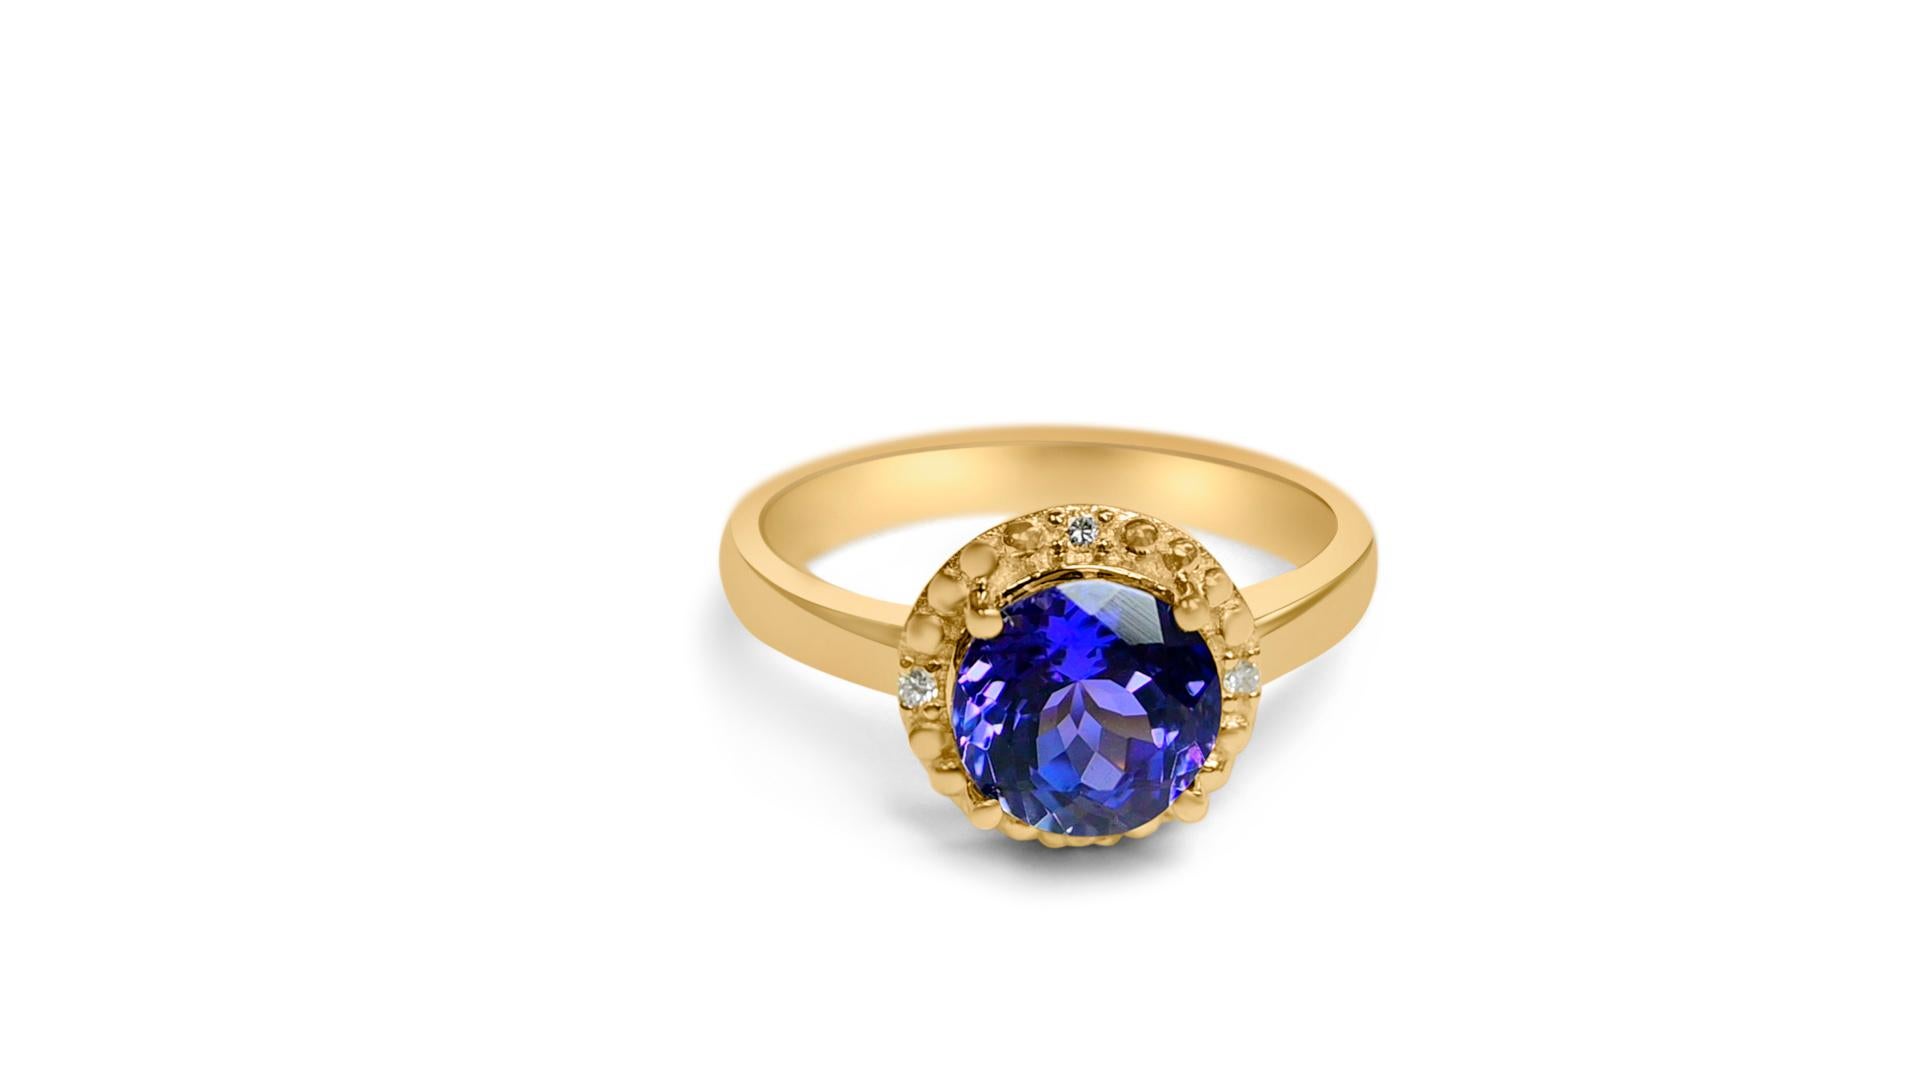 Welcome to Blue Star Gems NY LLC! Discover popular engagement ring & wedding ring designs from classic to vintage inspired. We offer Joyful jewelry for everyday wear. Just for you. We go above and beyond the current industry standards to offer